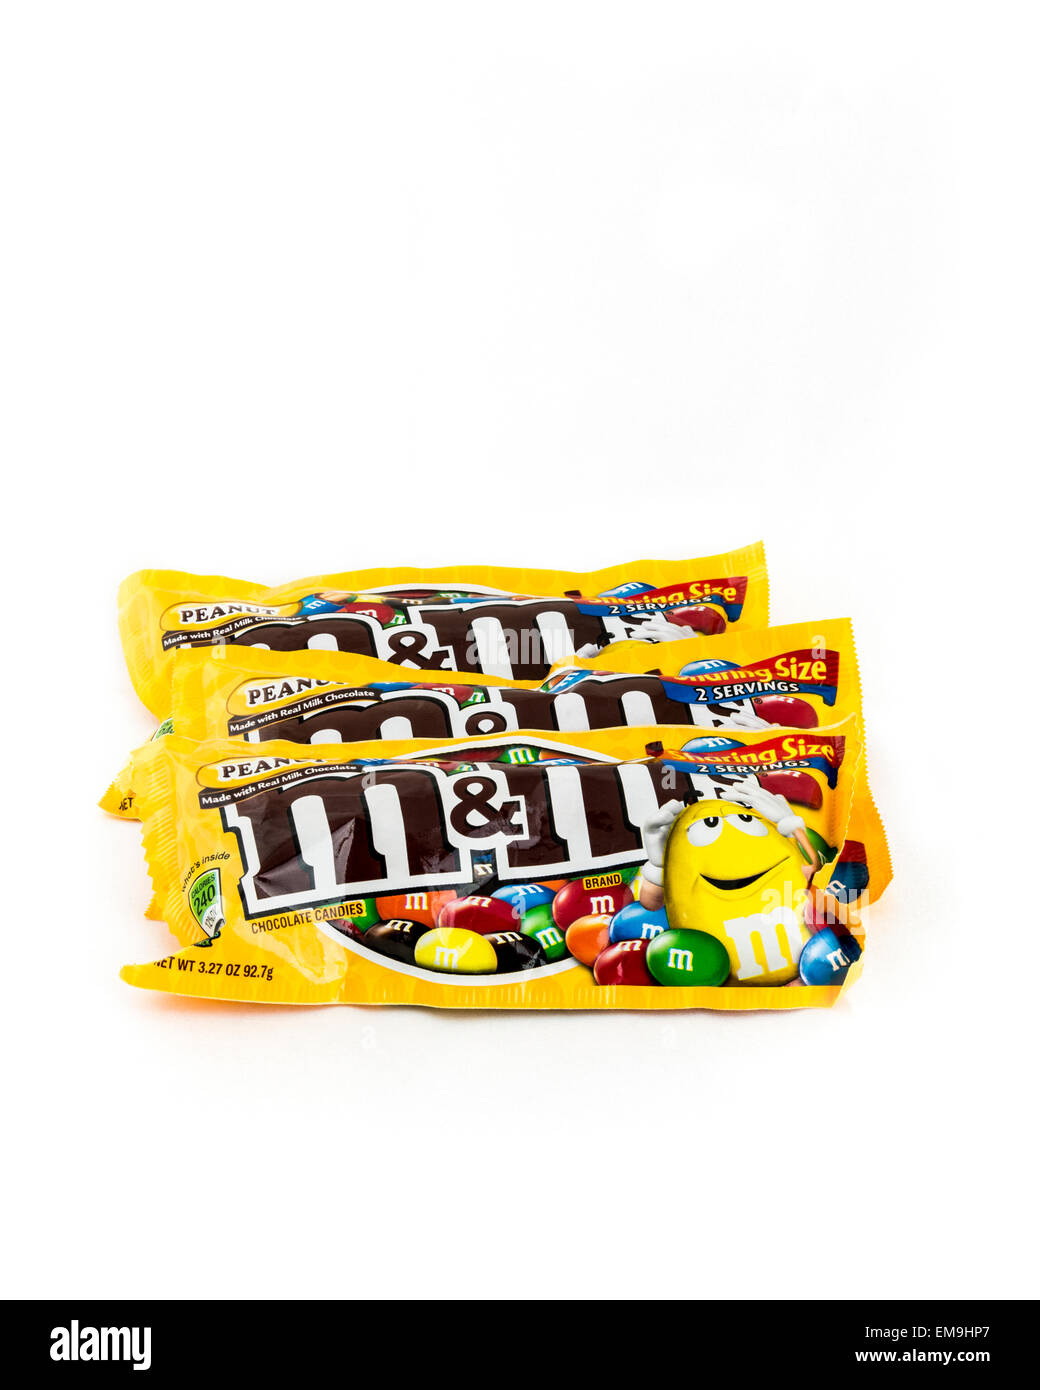 Three M&M chocolate candy packages on a white background. USA. Stock Photo